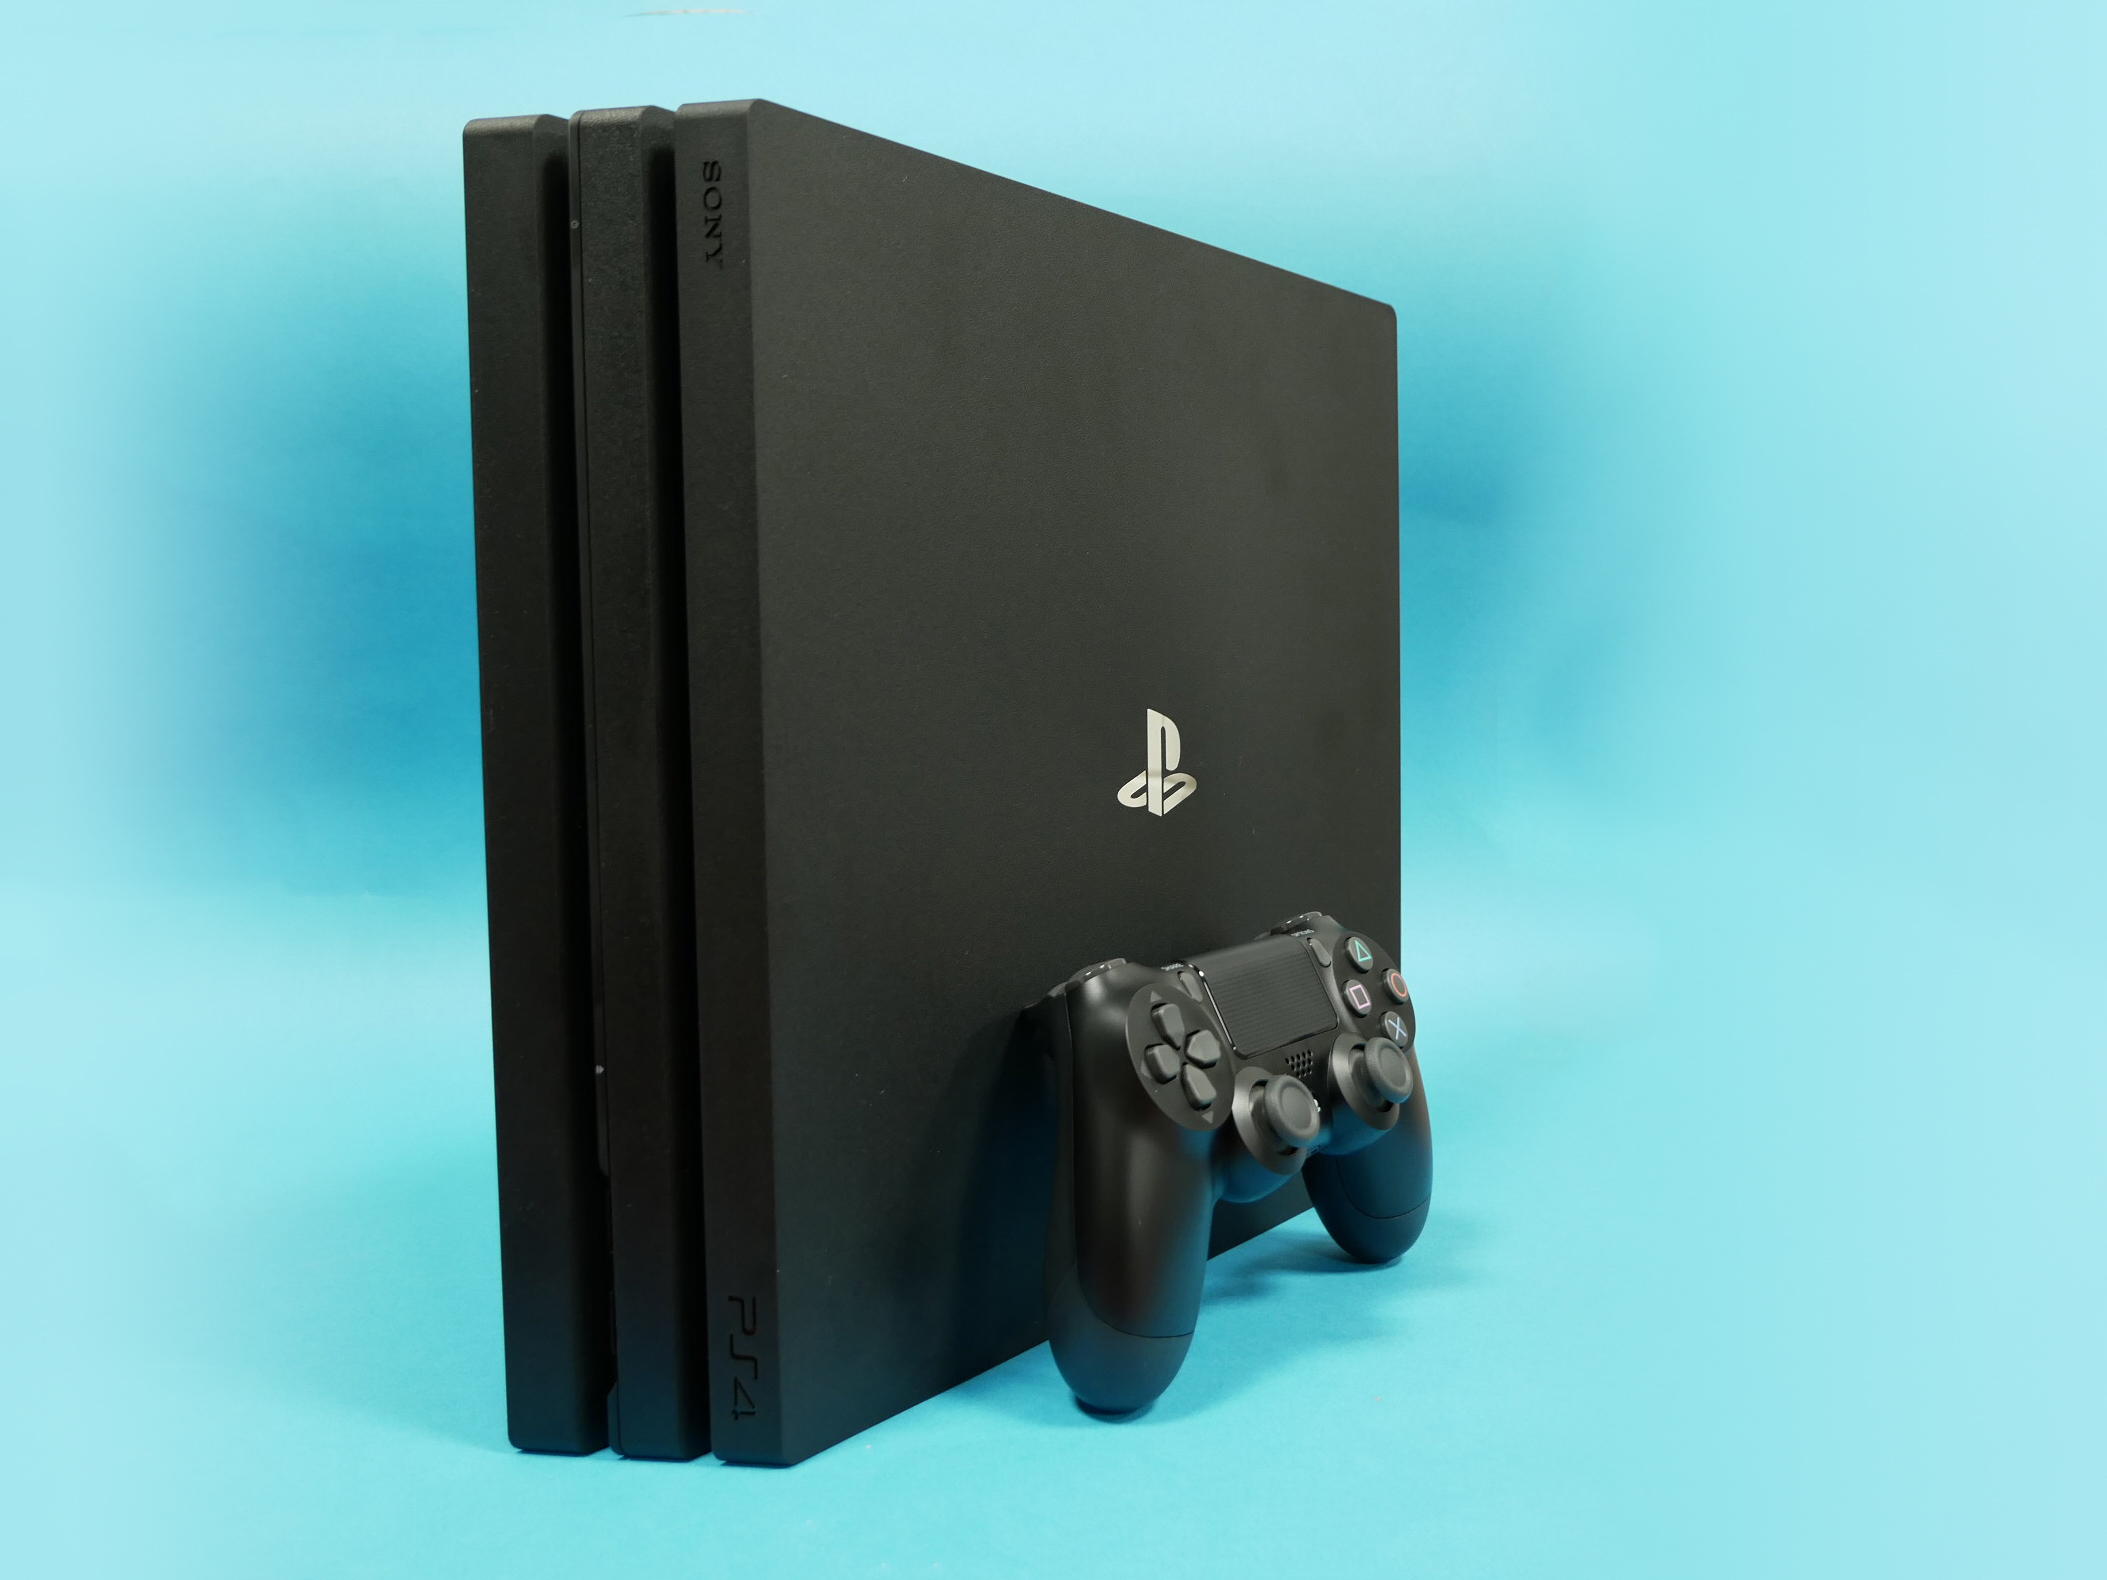 Sony PlayStation 4 Pro Review 2020: 4K at a Price, game playstation 4 